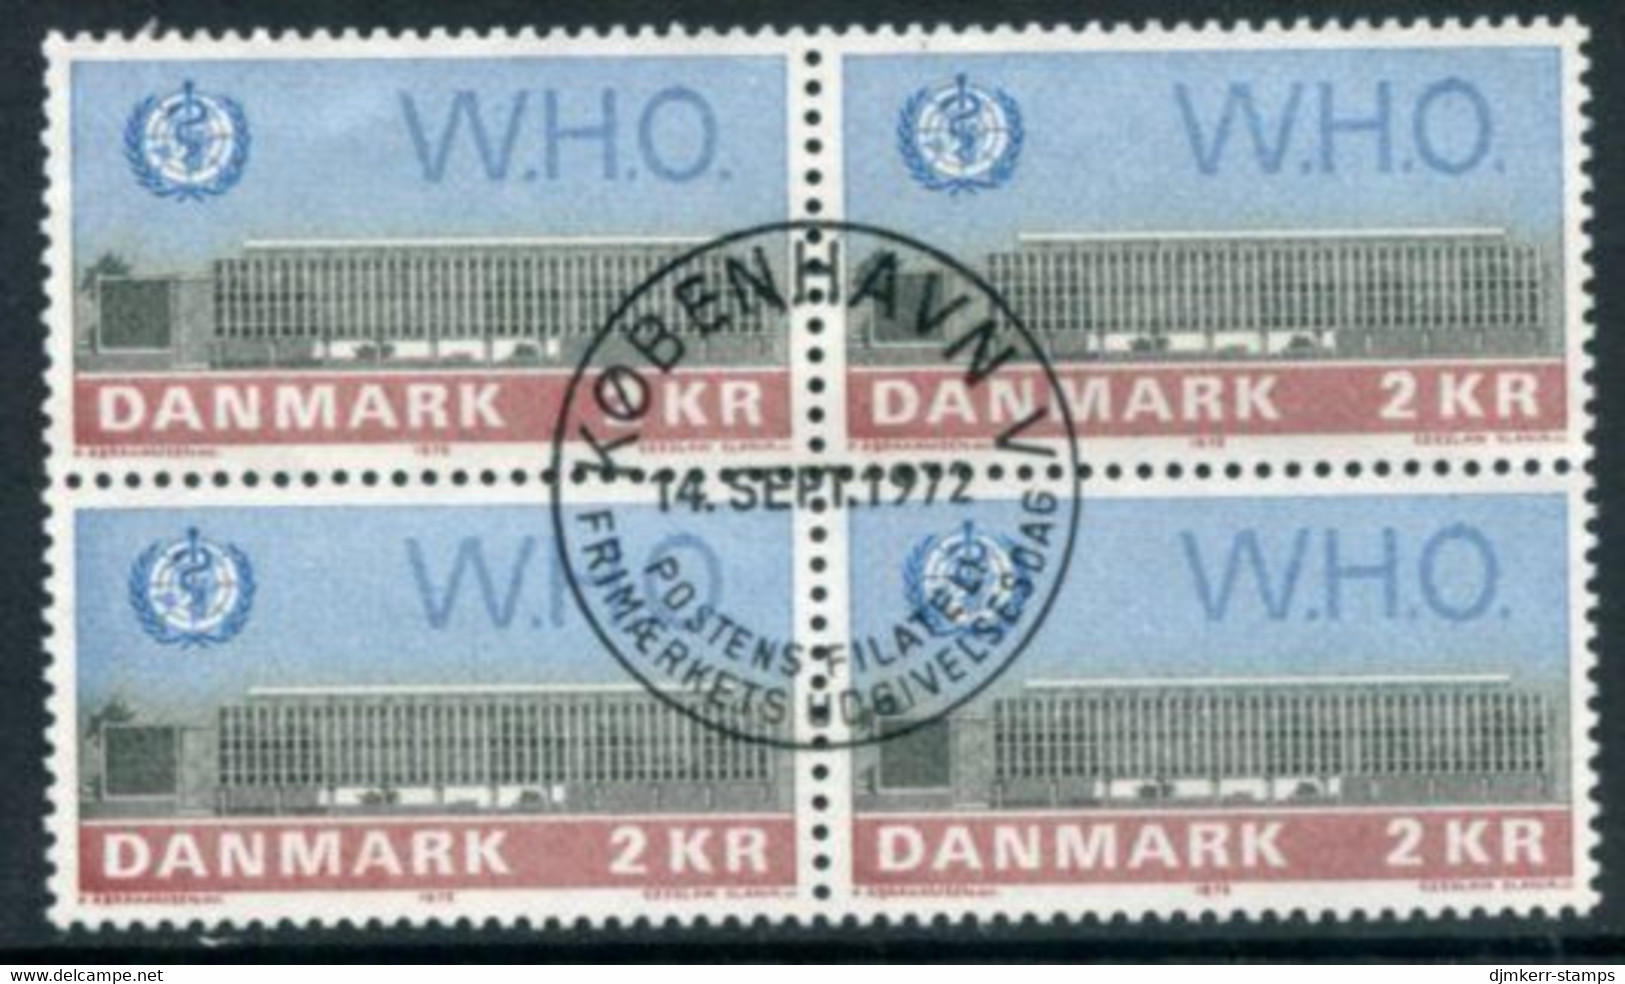 DENMARK 1972 WHO Headquarters. Block Of 4 Used   Michel 531 - Used Stamps